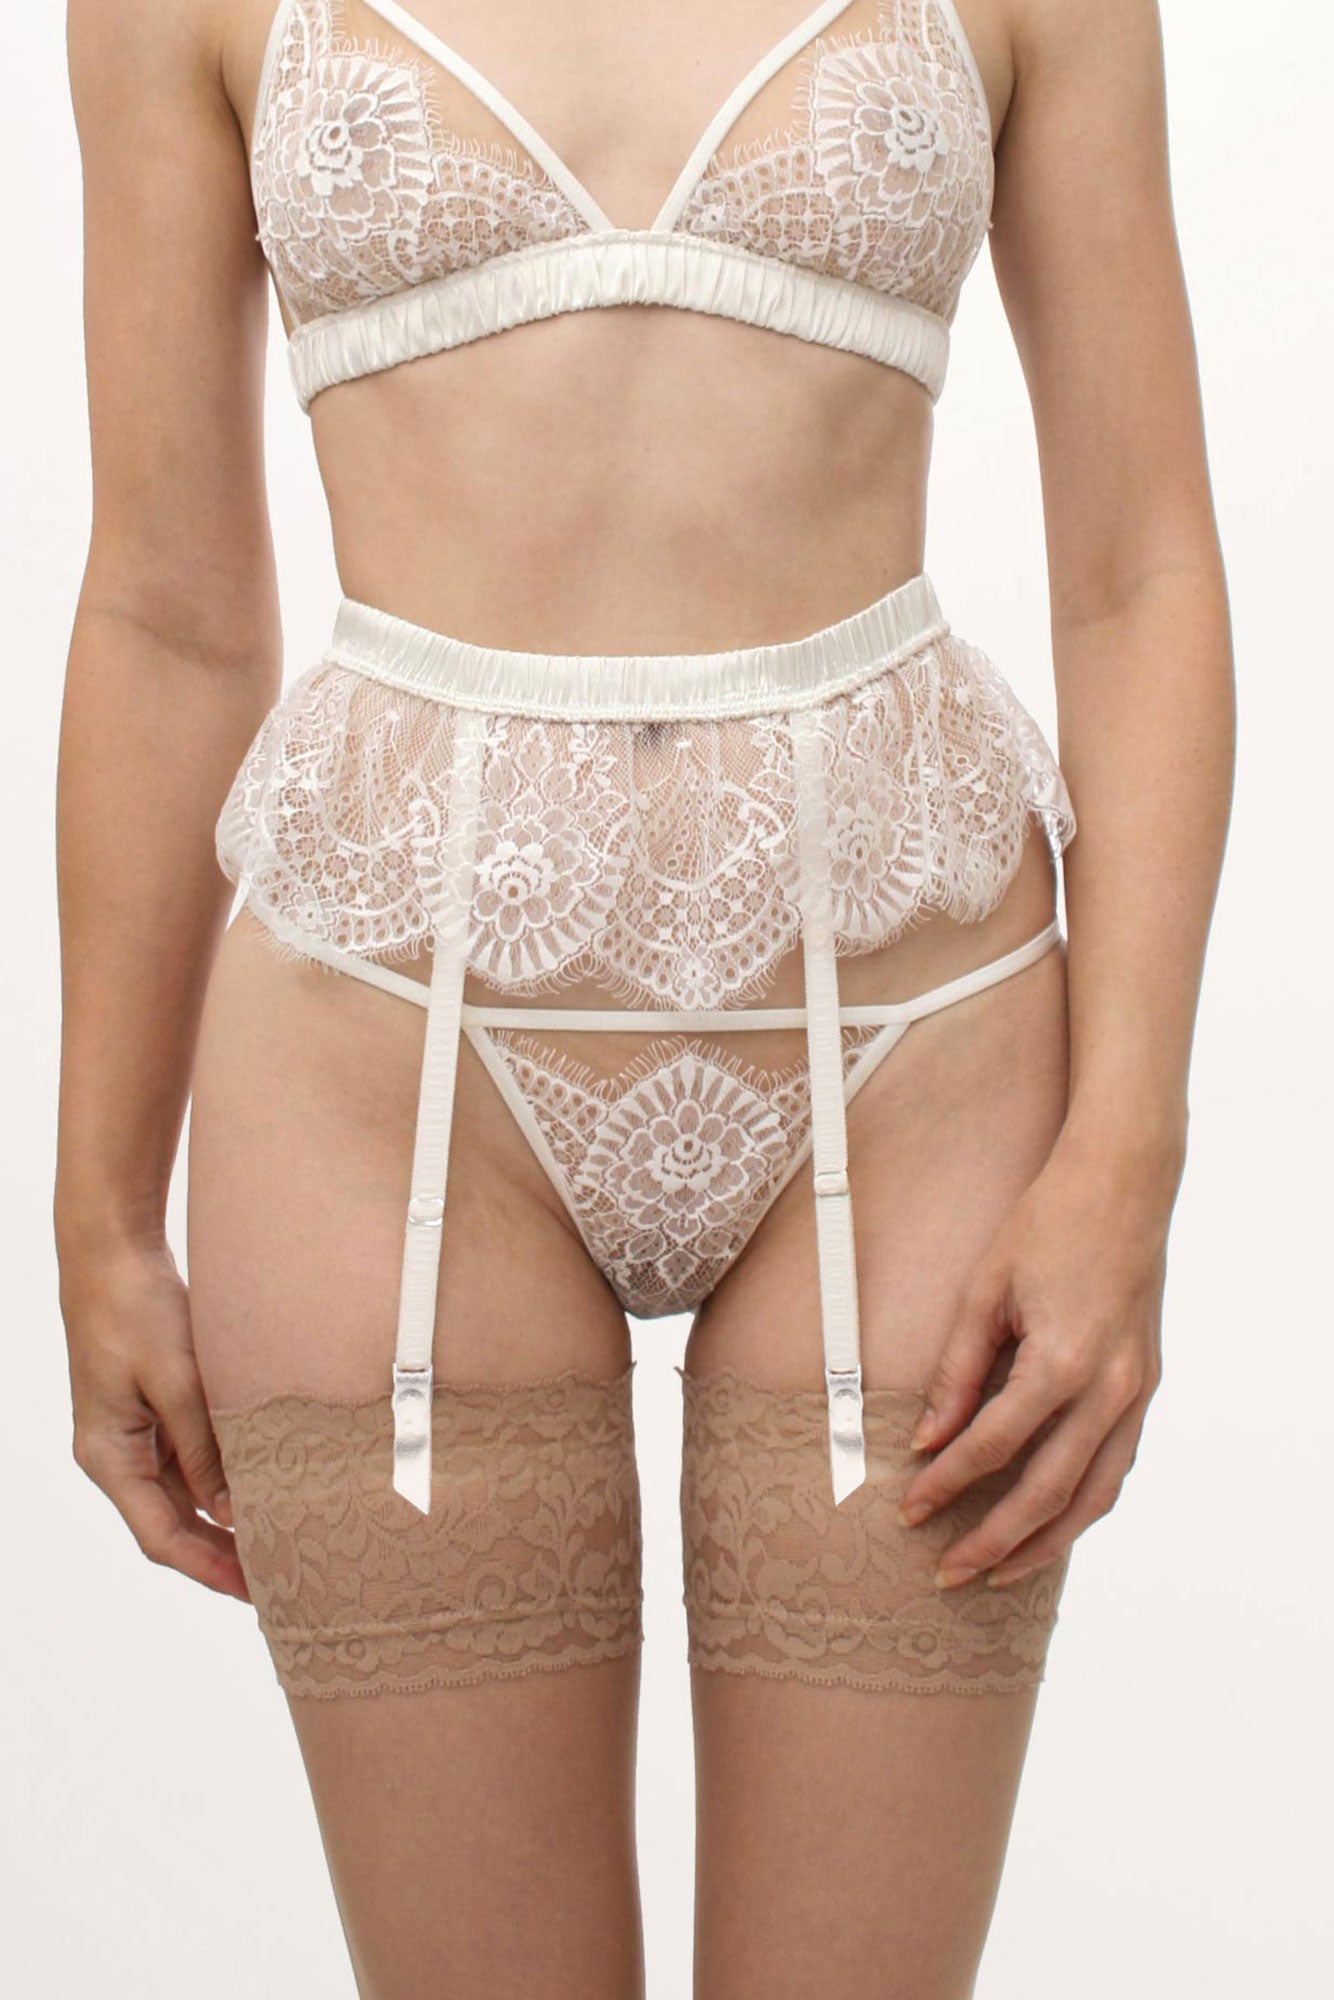 Luxury wedding lingerie set with a white lace suspender belt and thong